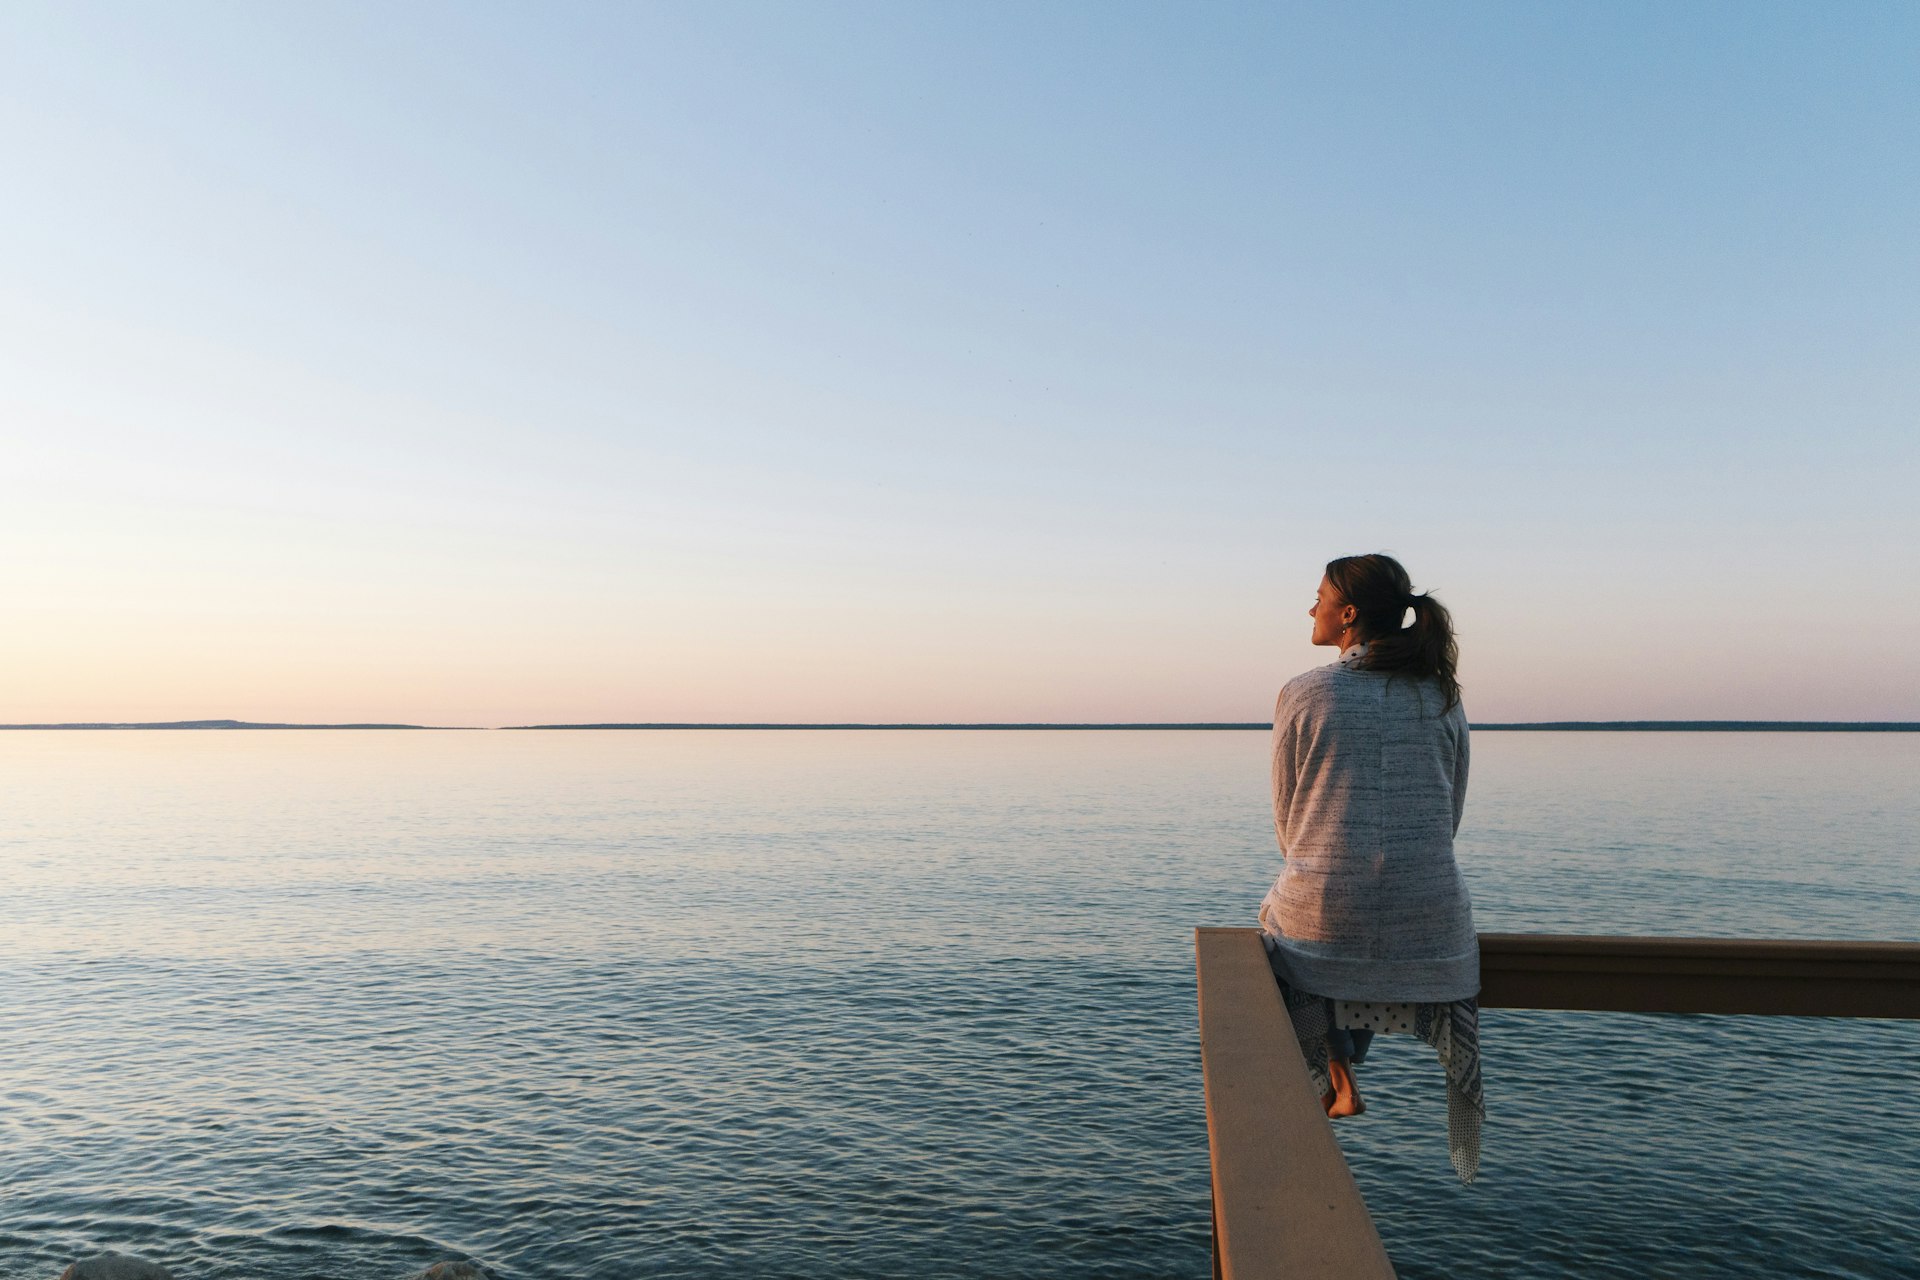 Young woman sitting on edge looks out at view of a lake